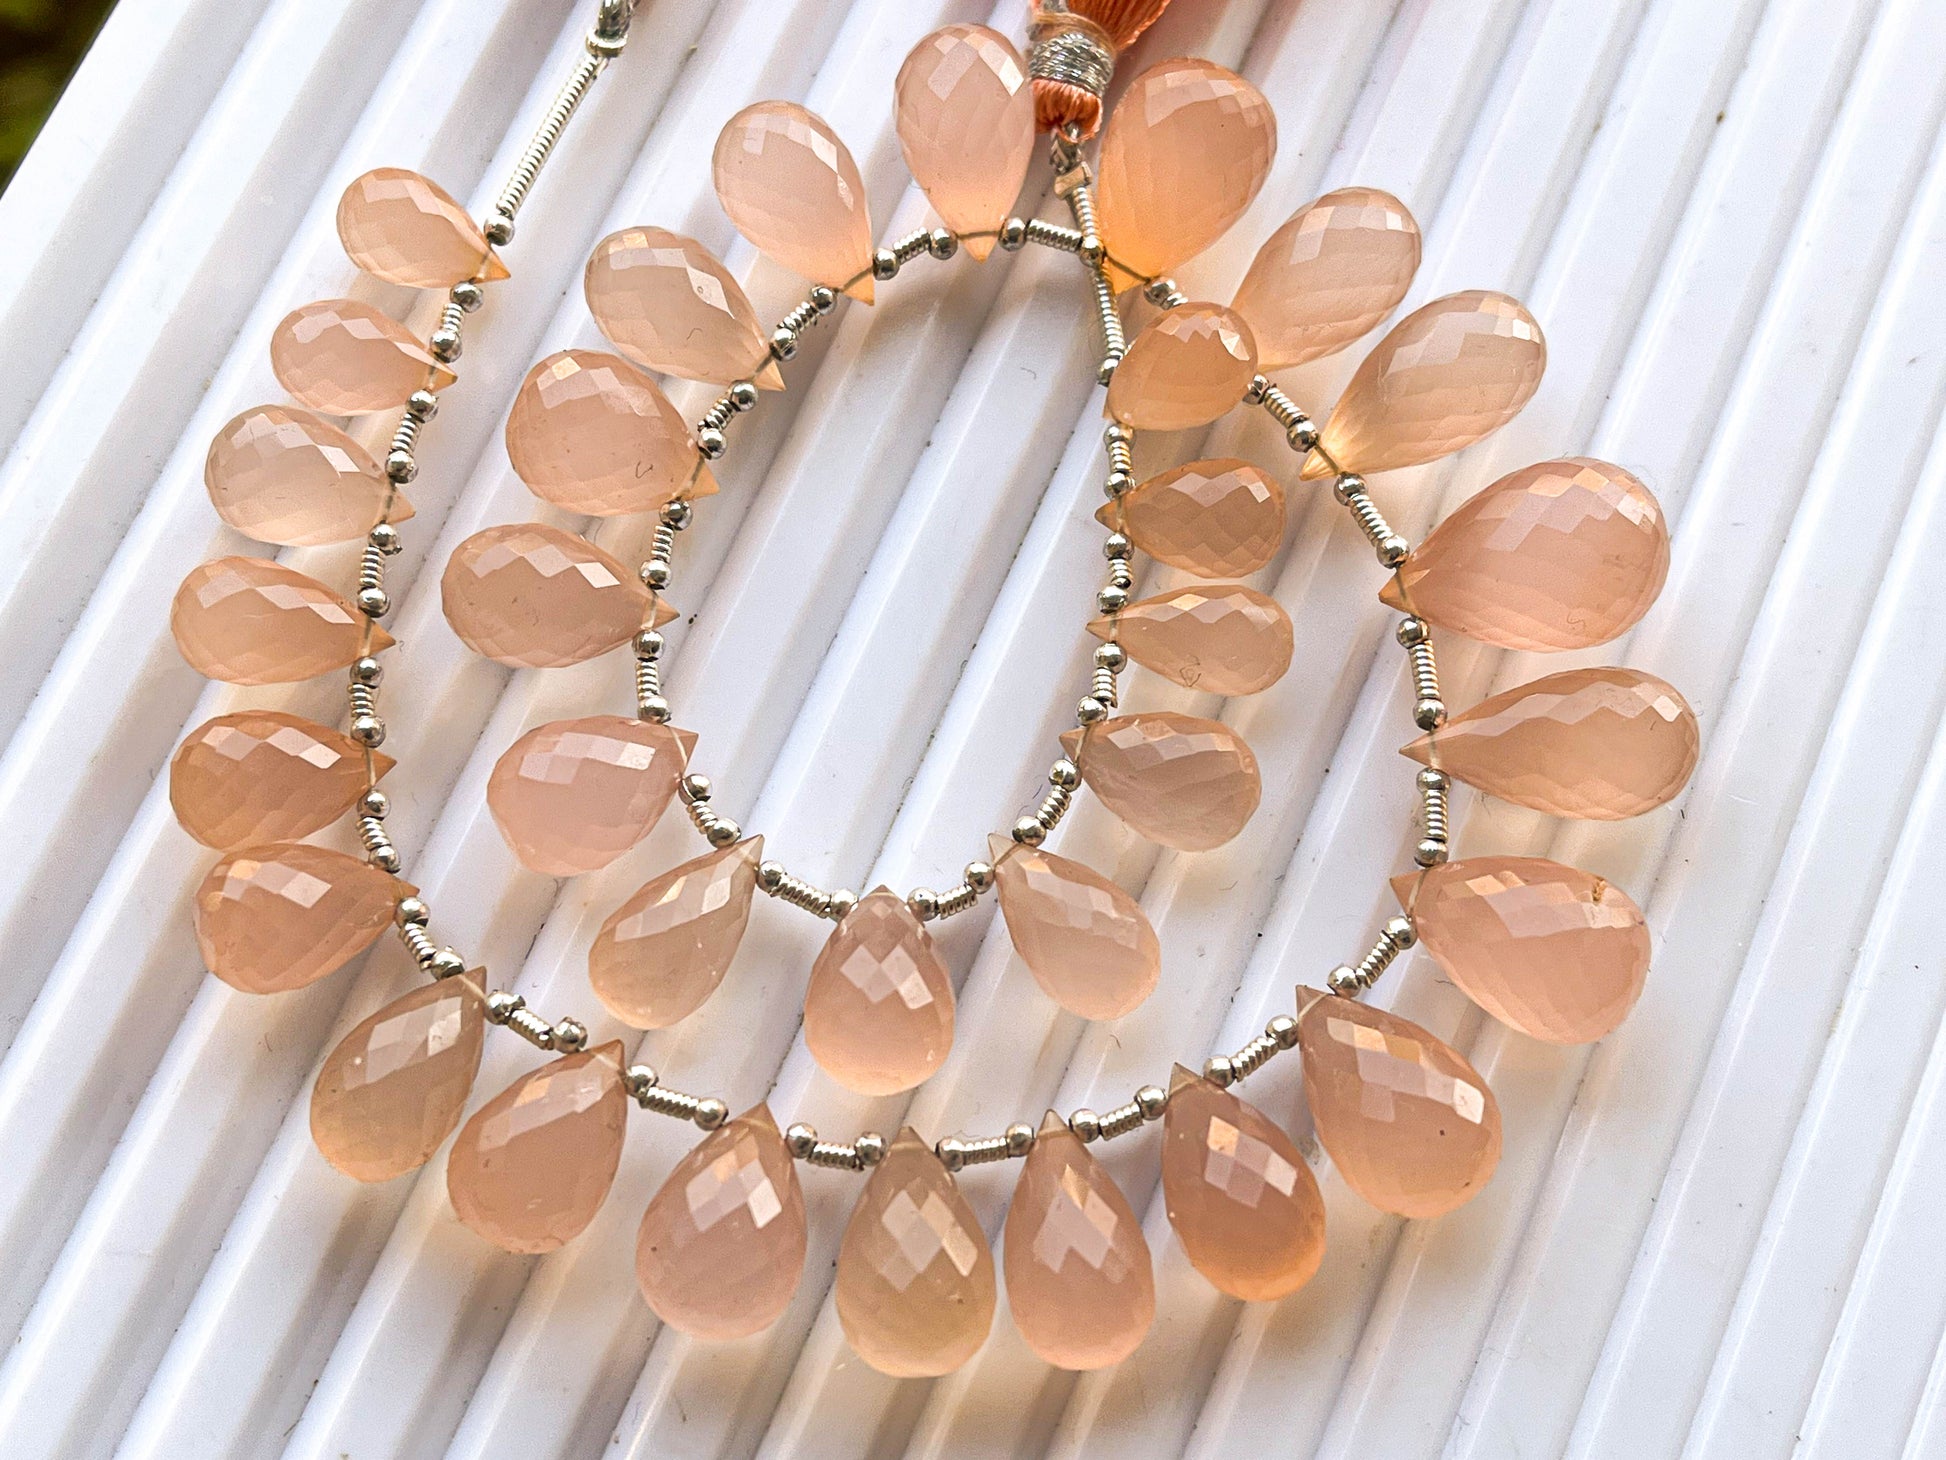 32 Pieces Peach Onyx Faceted Drops Beadsforyourjewelry